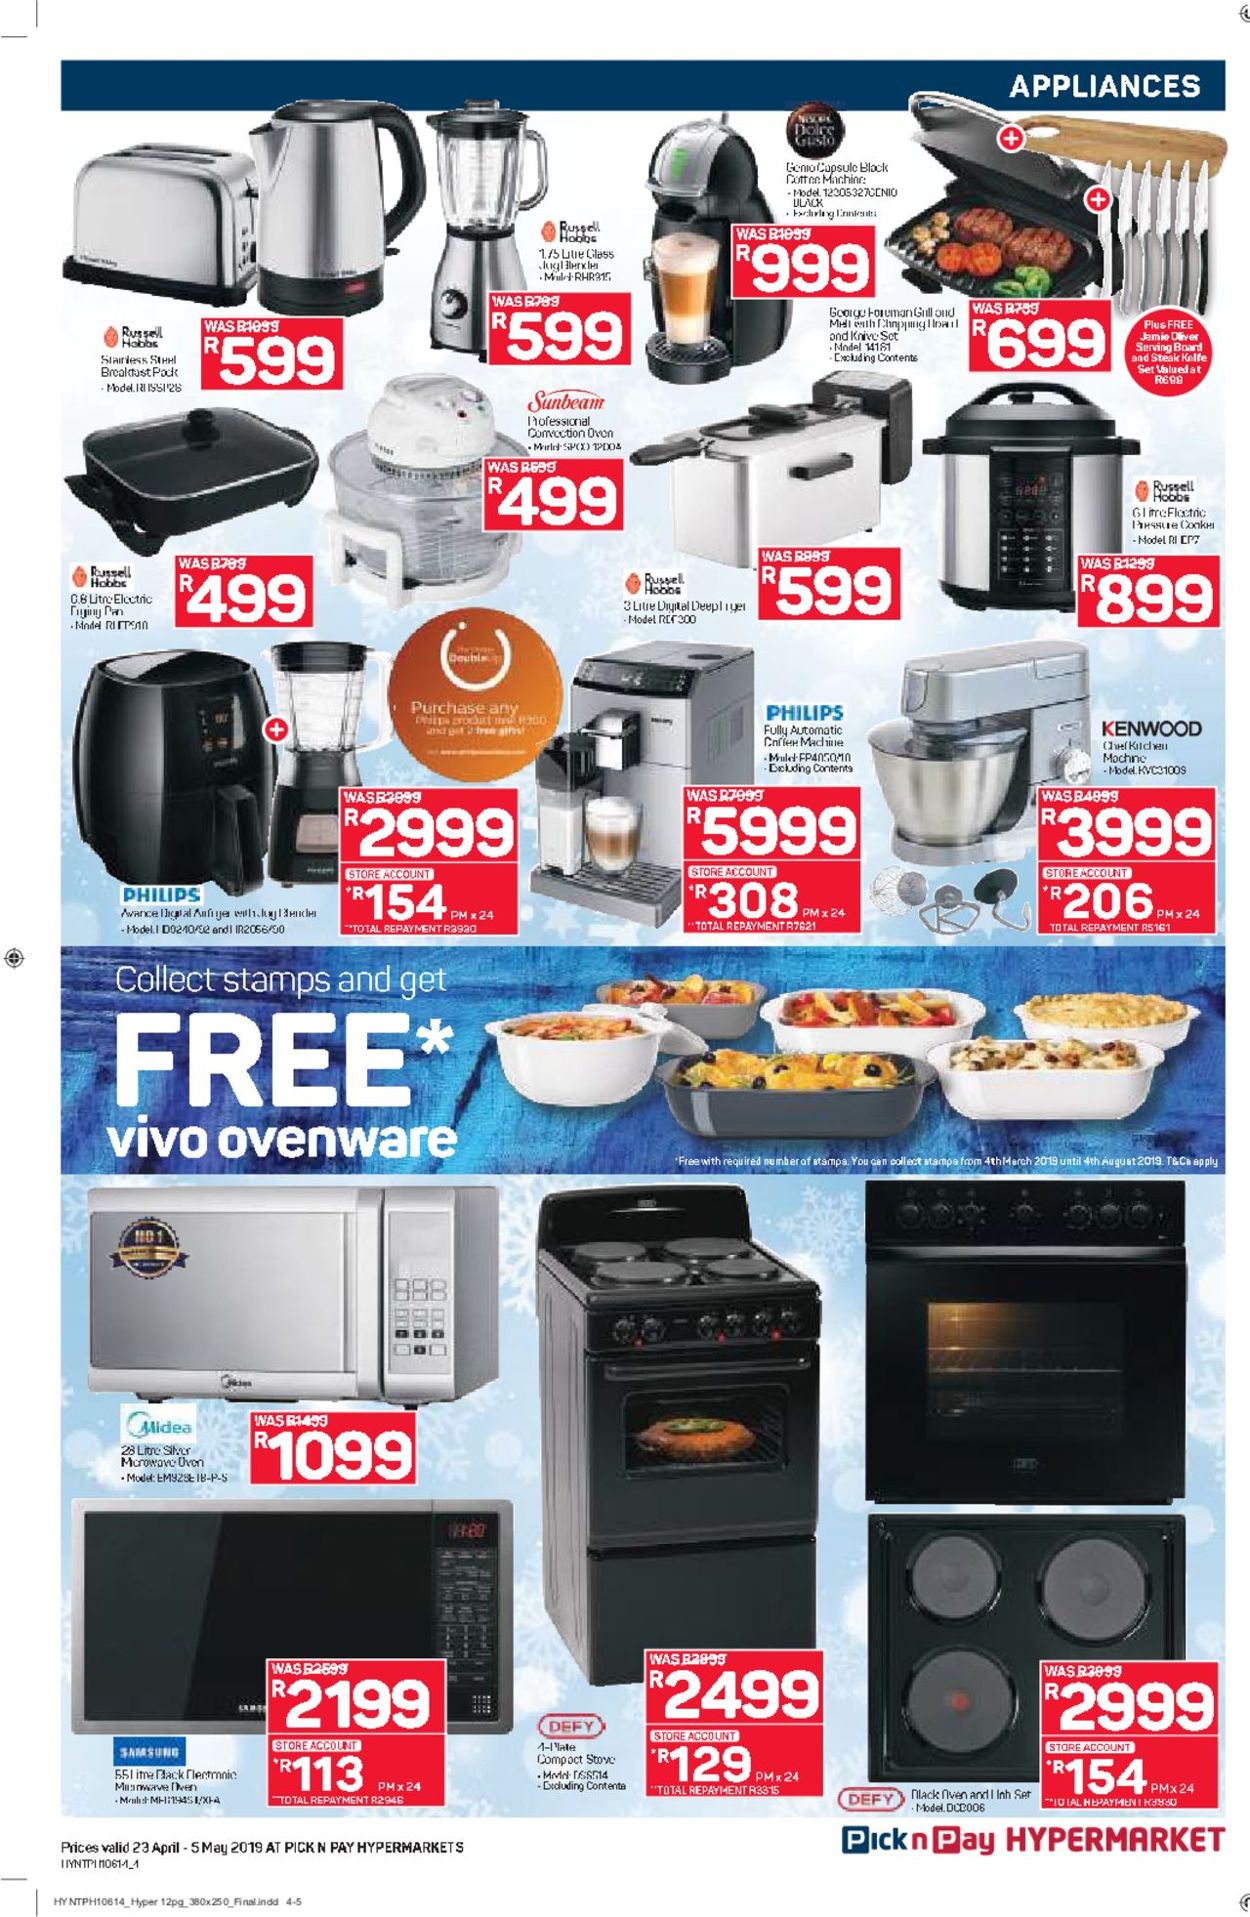 Pick n Pay Catalogue - 2019/04/23-2019/05/05 (Page 4)